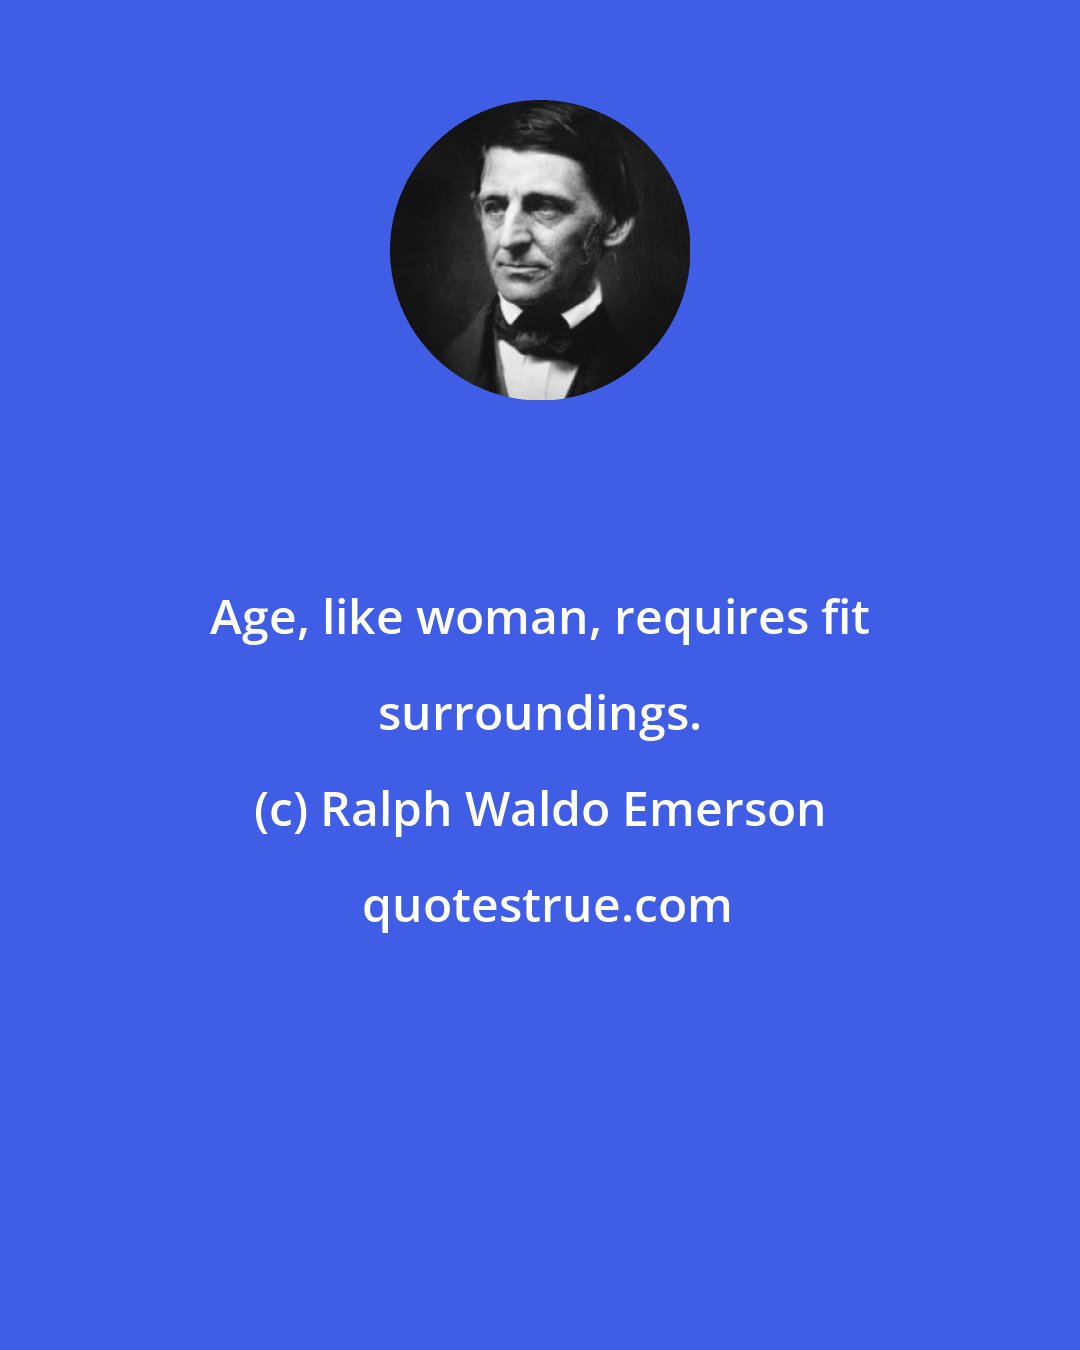 Ralph Waldo Emerson: Age, like woman, requires fit surroundings.